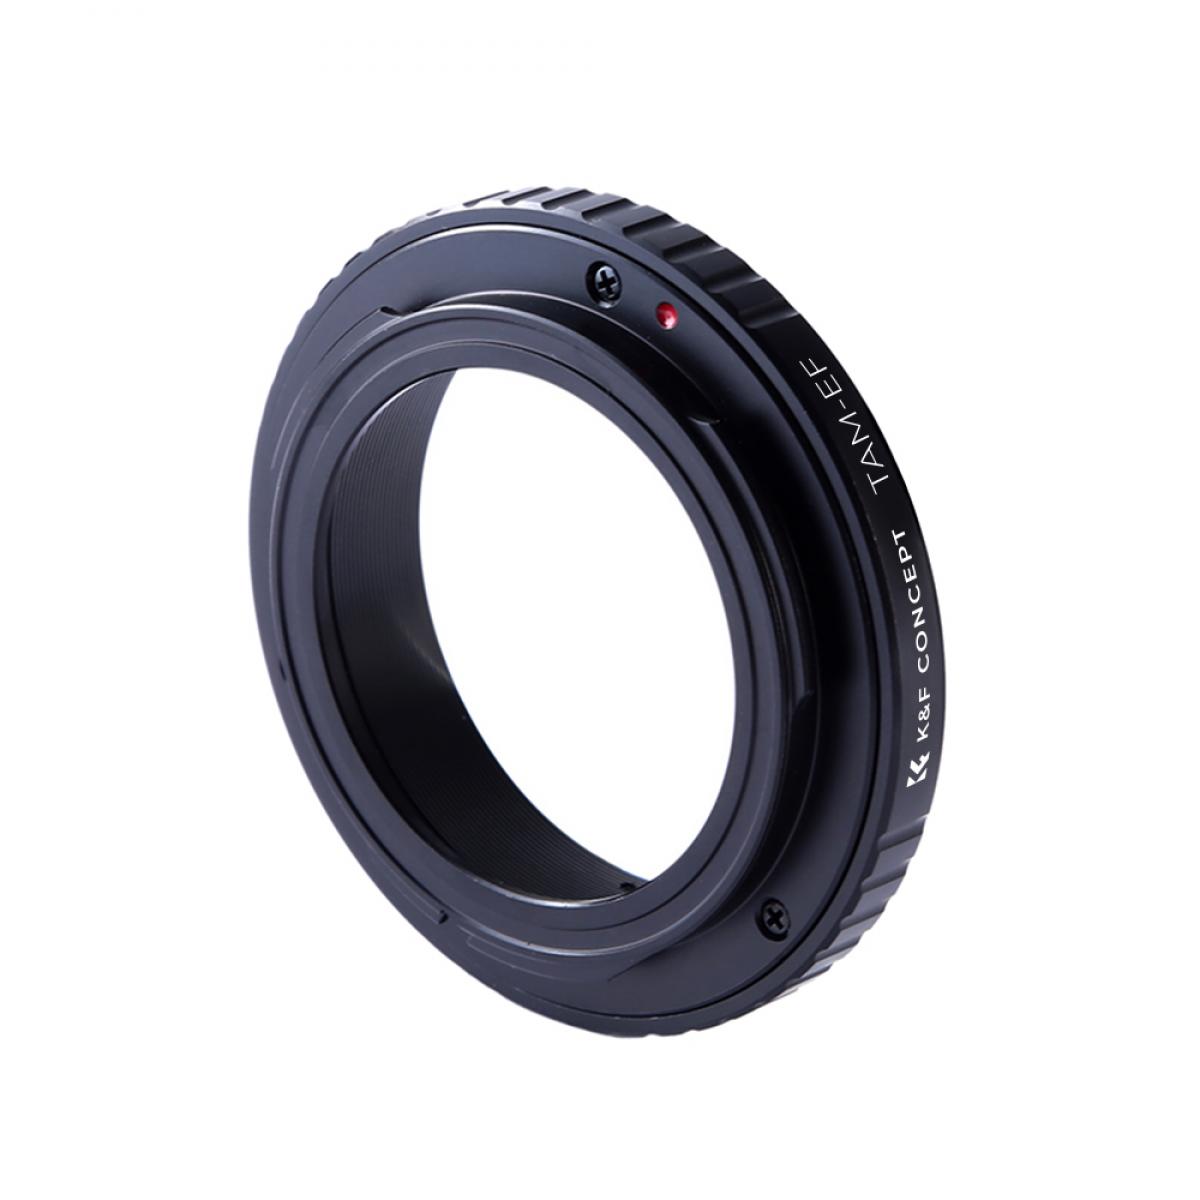 K&F Concept Tamron to EOS Lens Mount Adapter, Compatible with Tamron Adaptall2 Adaptall-2/adapterll II Mount Lens and Compatible with Canon EF EF-S EOS Mount Cameras 